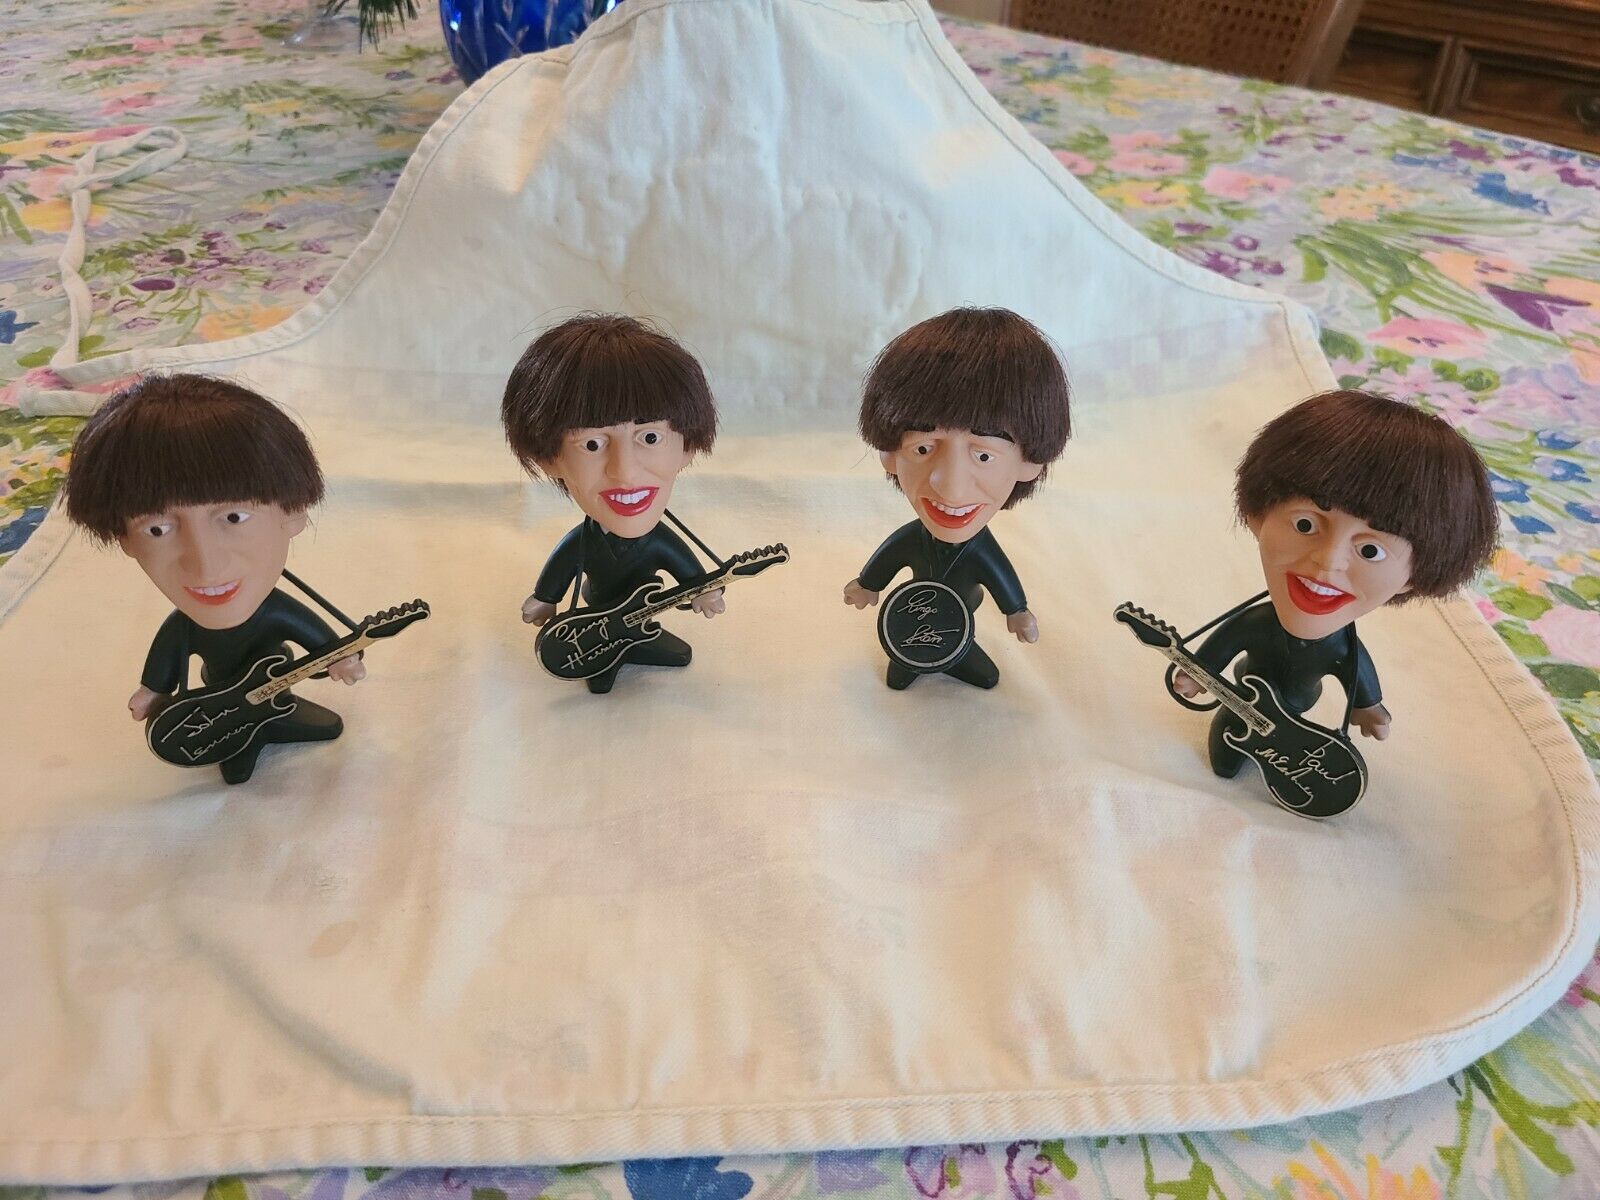 1964 Remco Set Of The Beatles Dolls - Complete With Instruments.